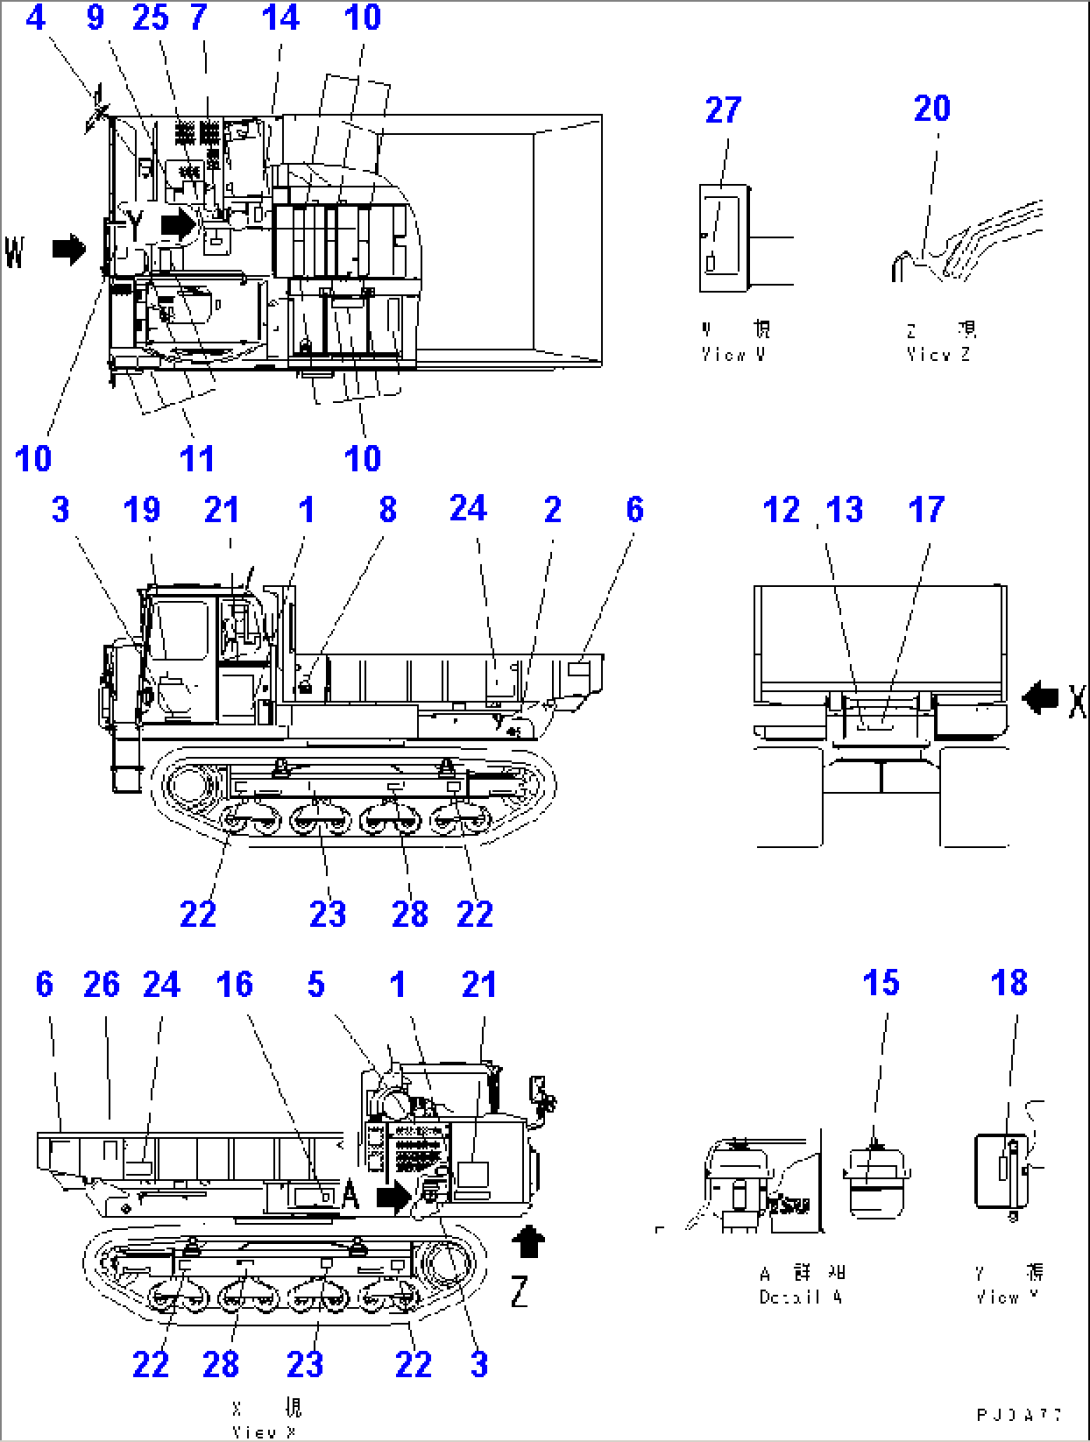 MARKS AND PLATES (1/2)(#1260-1339)